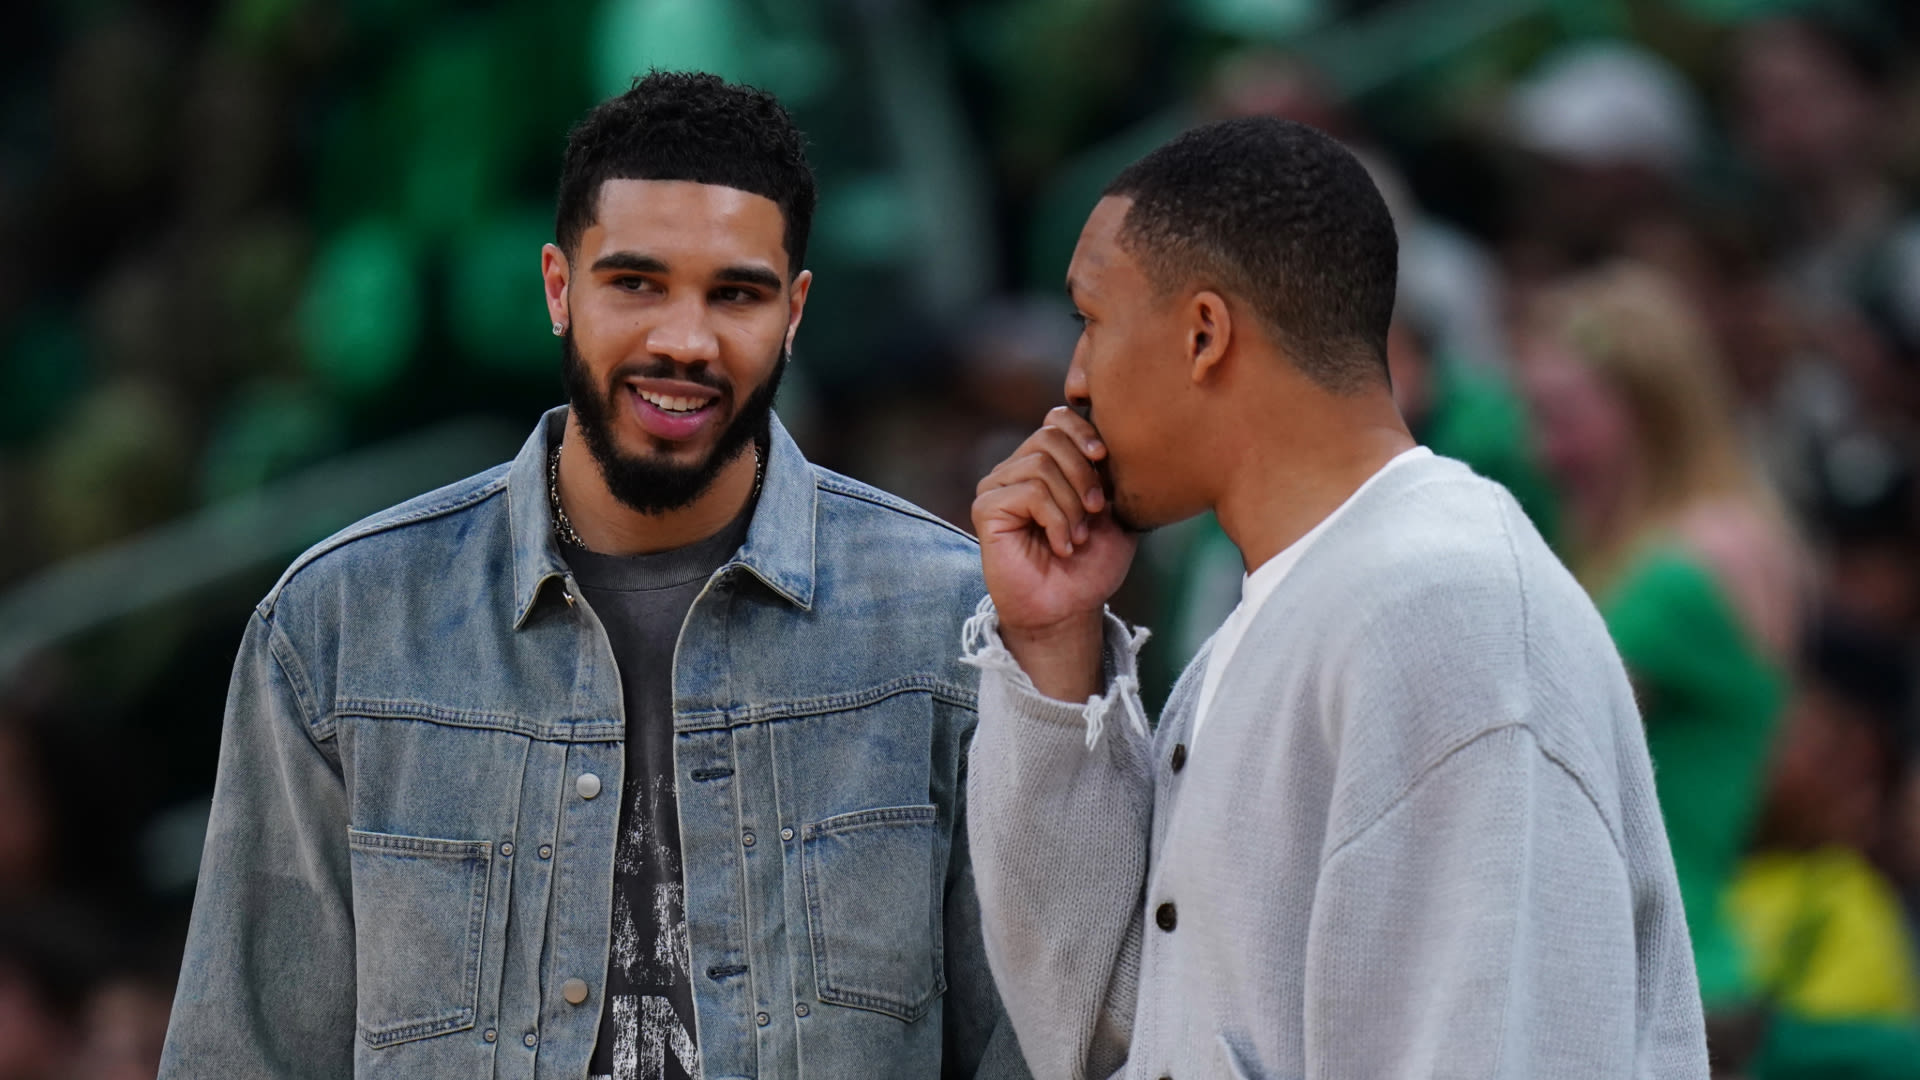 Grant Williams Expected Celtics Tribute Video: 'I Don't Get No Love'